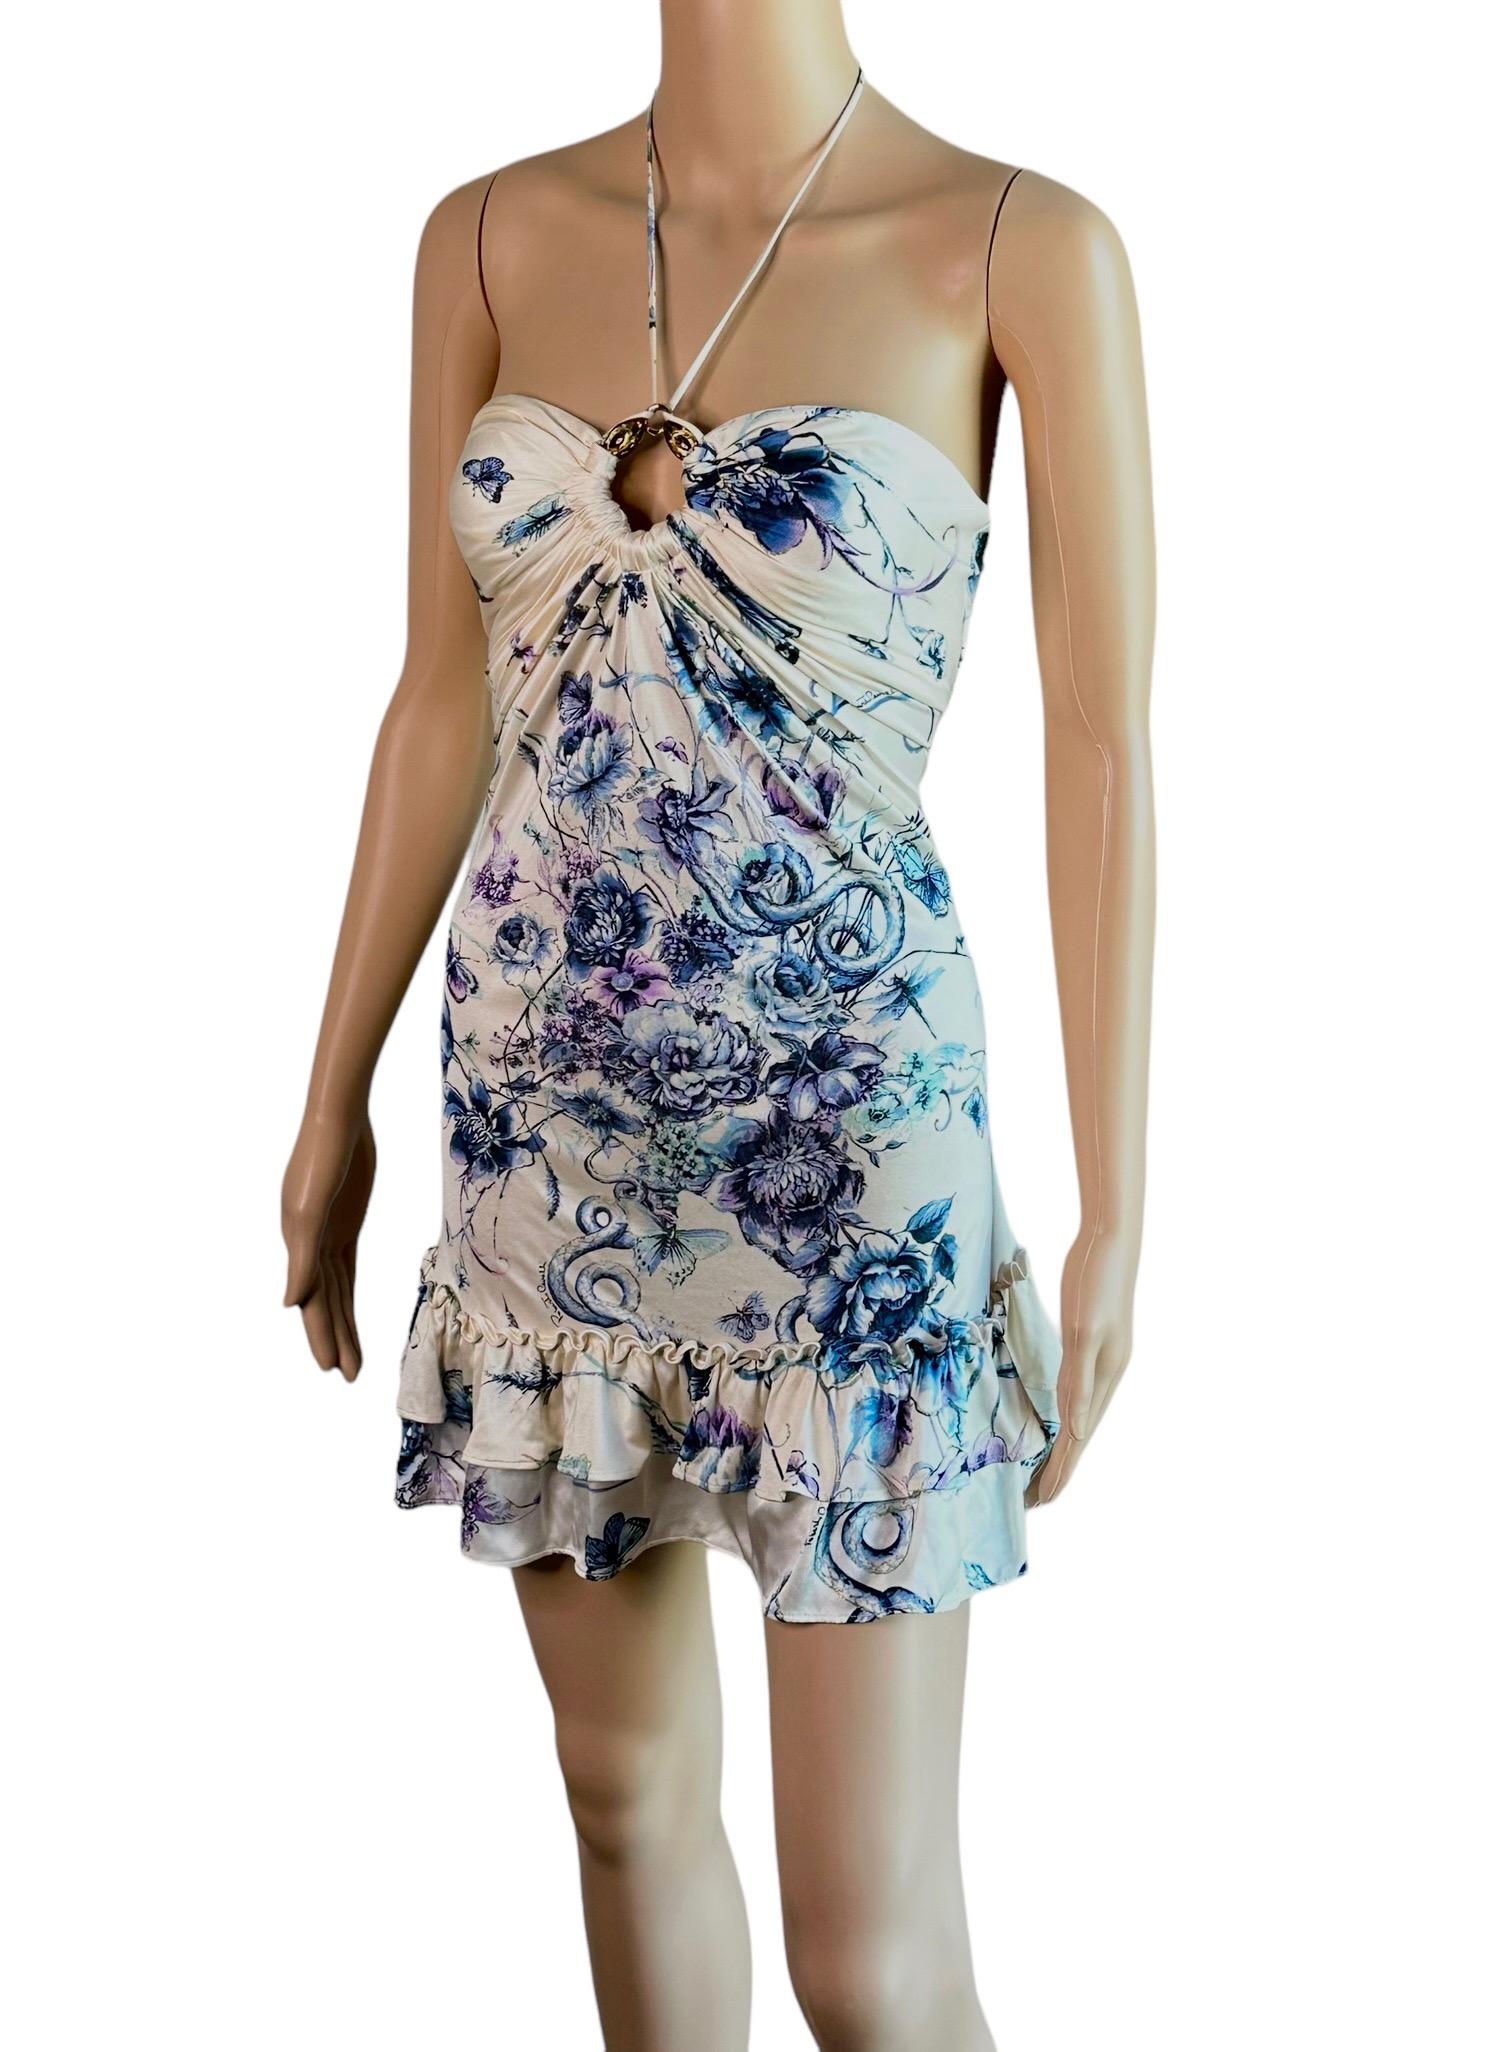 Roberto Cavalli S/S 2005 Tattoo Floral Abstract Print Mini Dress In Good Condition For Sale In Naples, FL